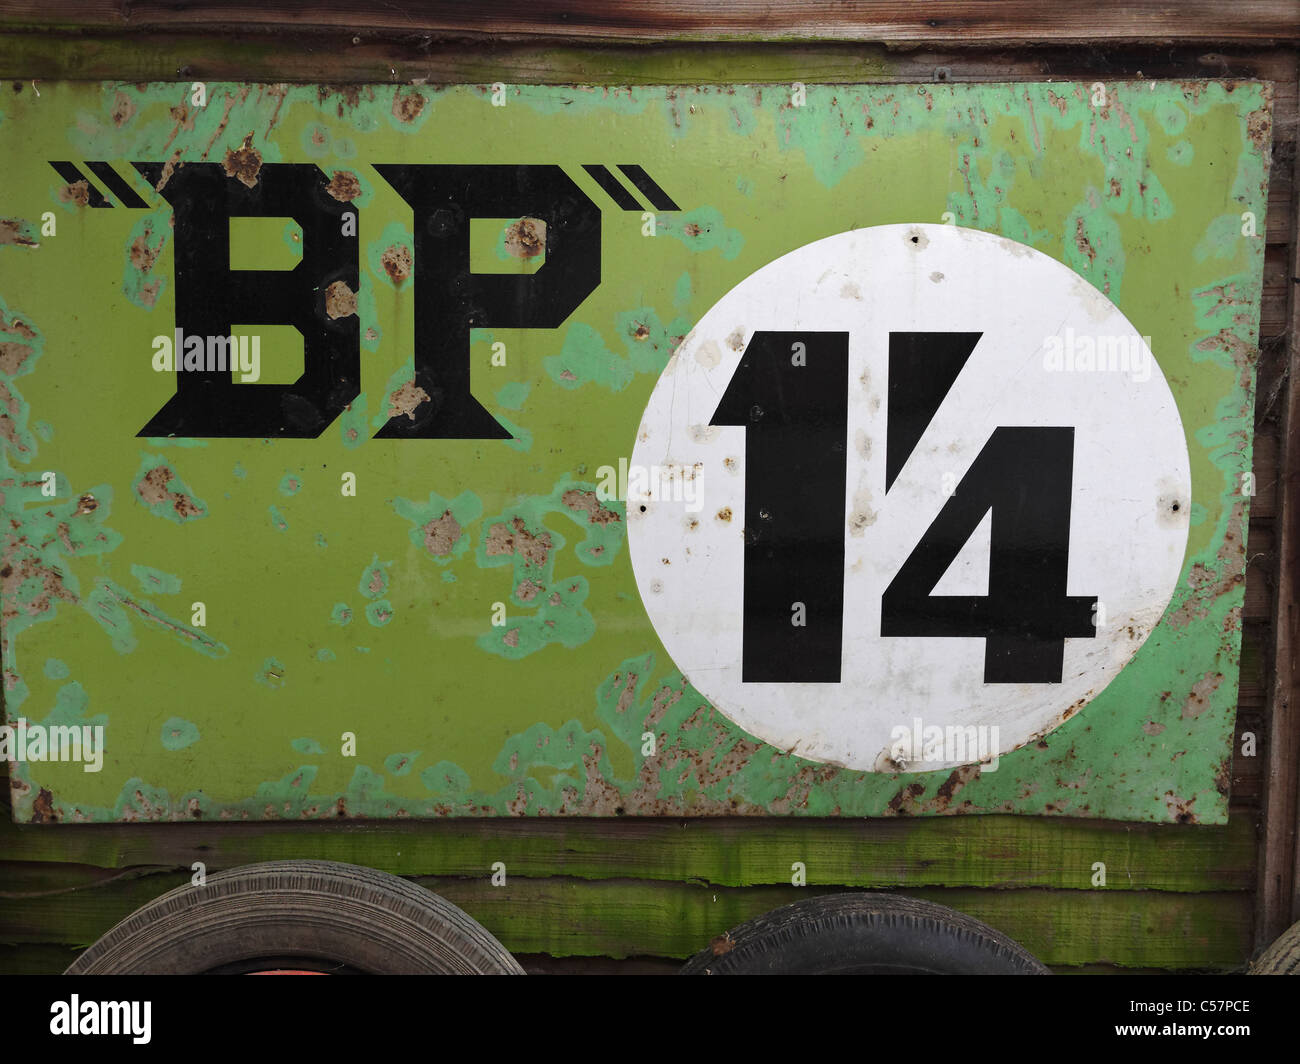 An old enamel sign advertising BP petrol at a pre-decimalisation price. Stock Photo